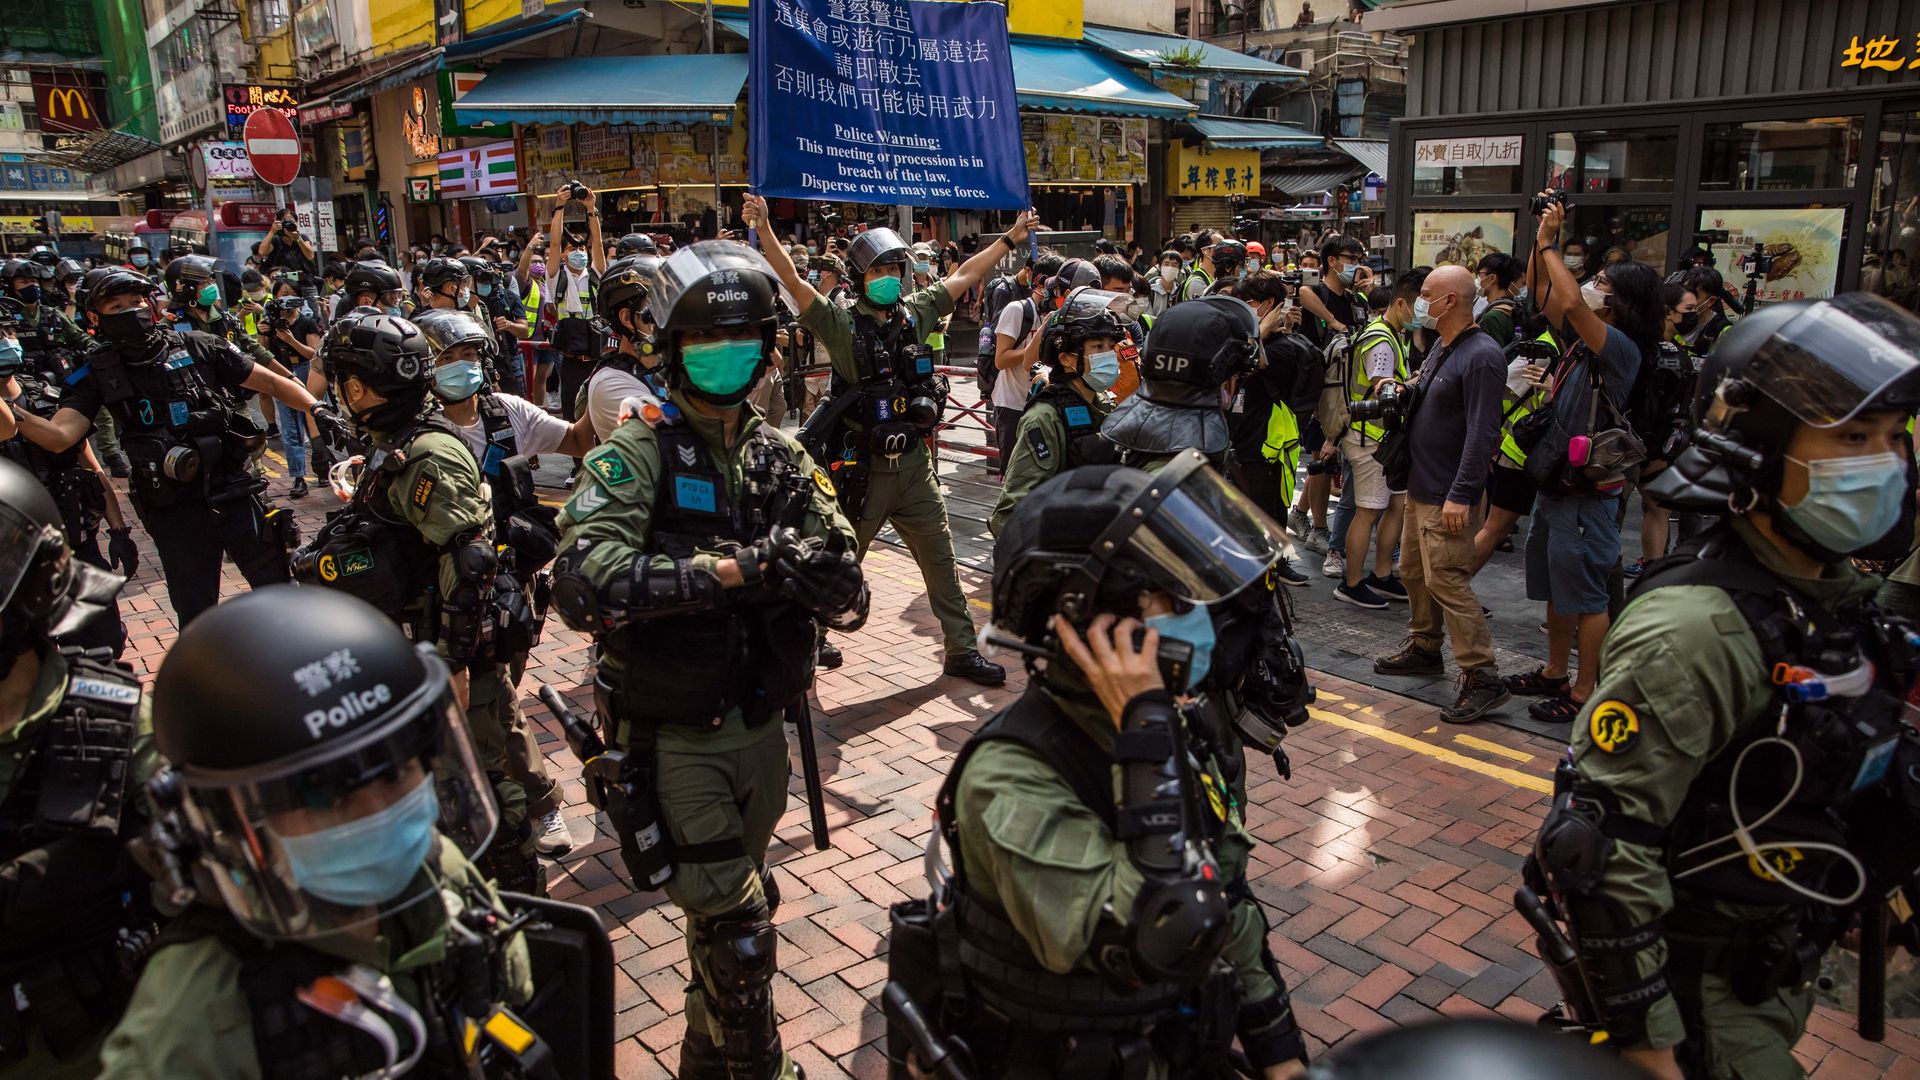 Police patrol the area after protesters called for a rally in Hong Kong